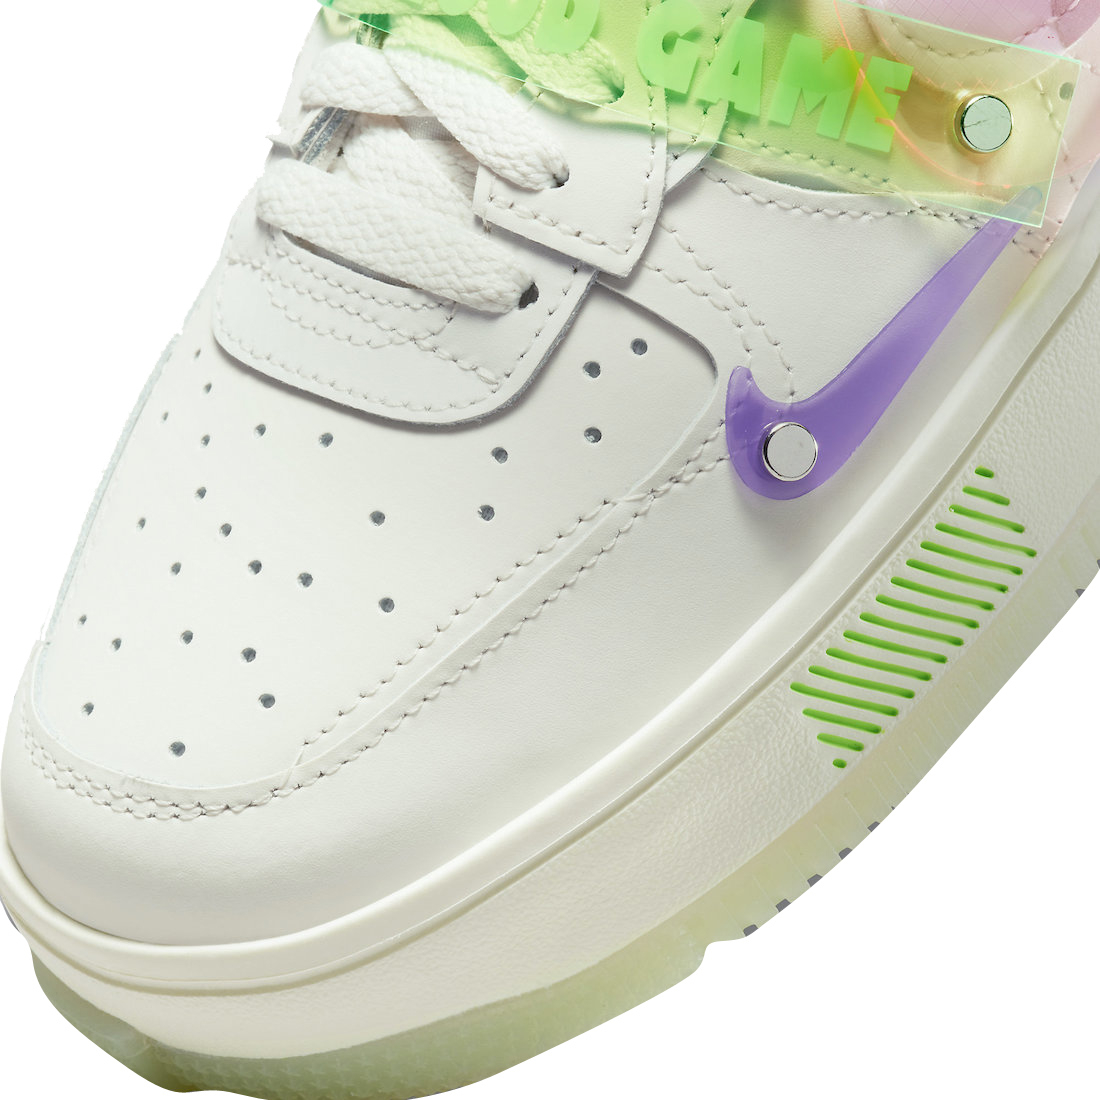 Nike WMNS Air Force 1 Fontanka Have a Good Game DO2332-111